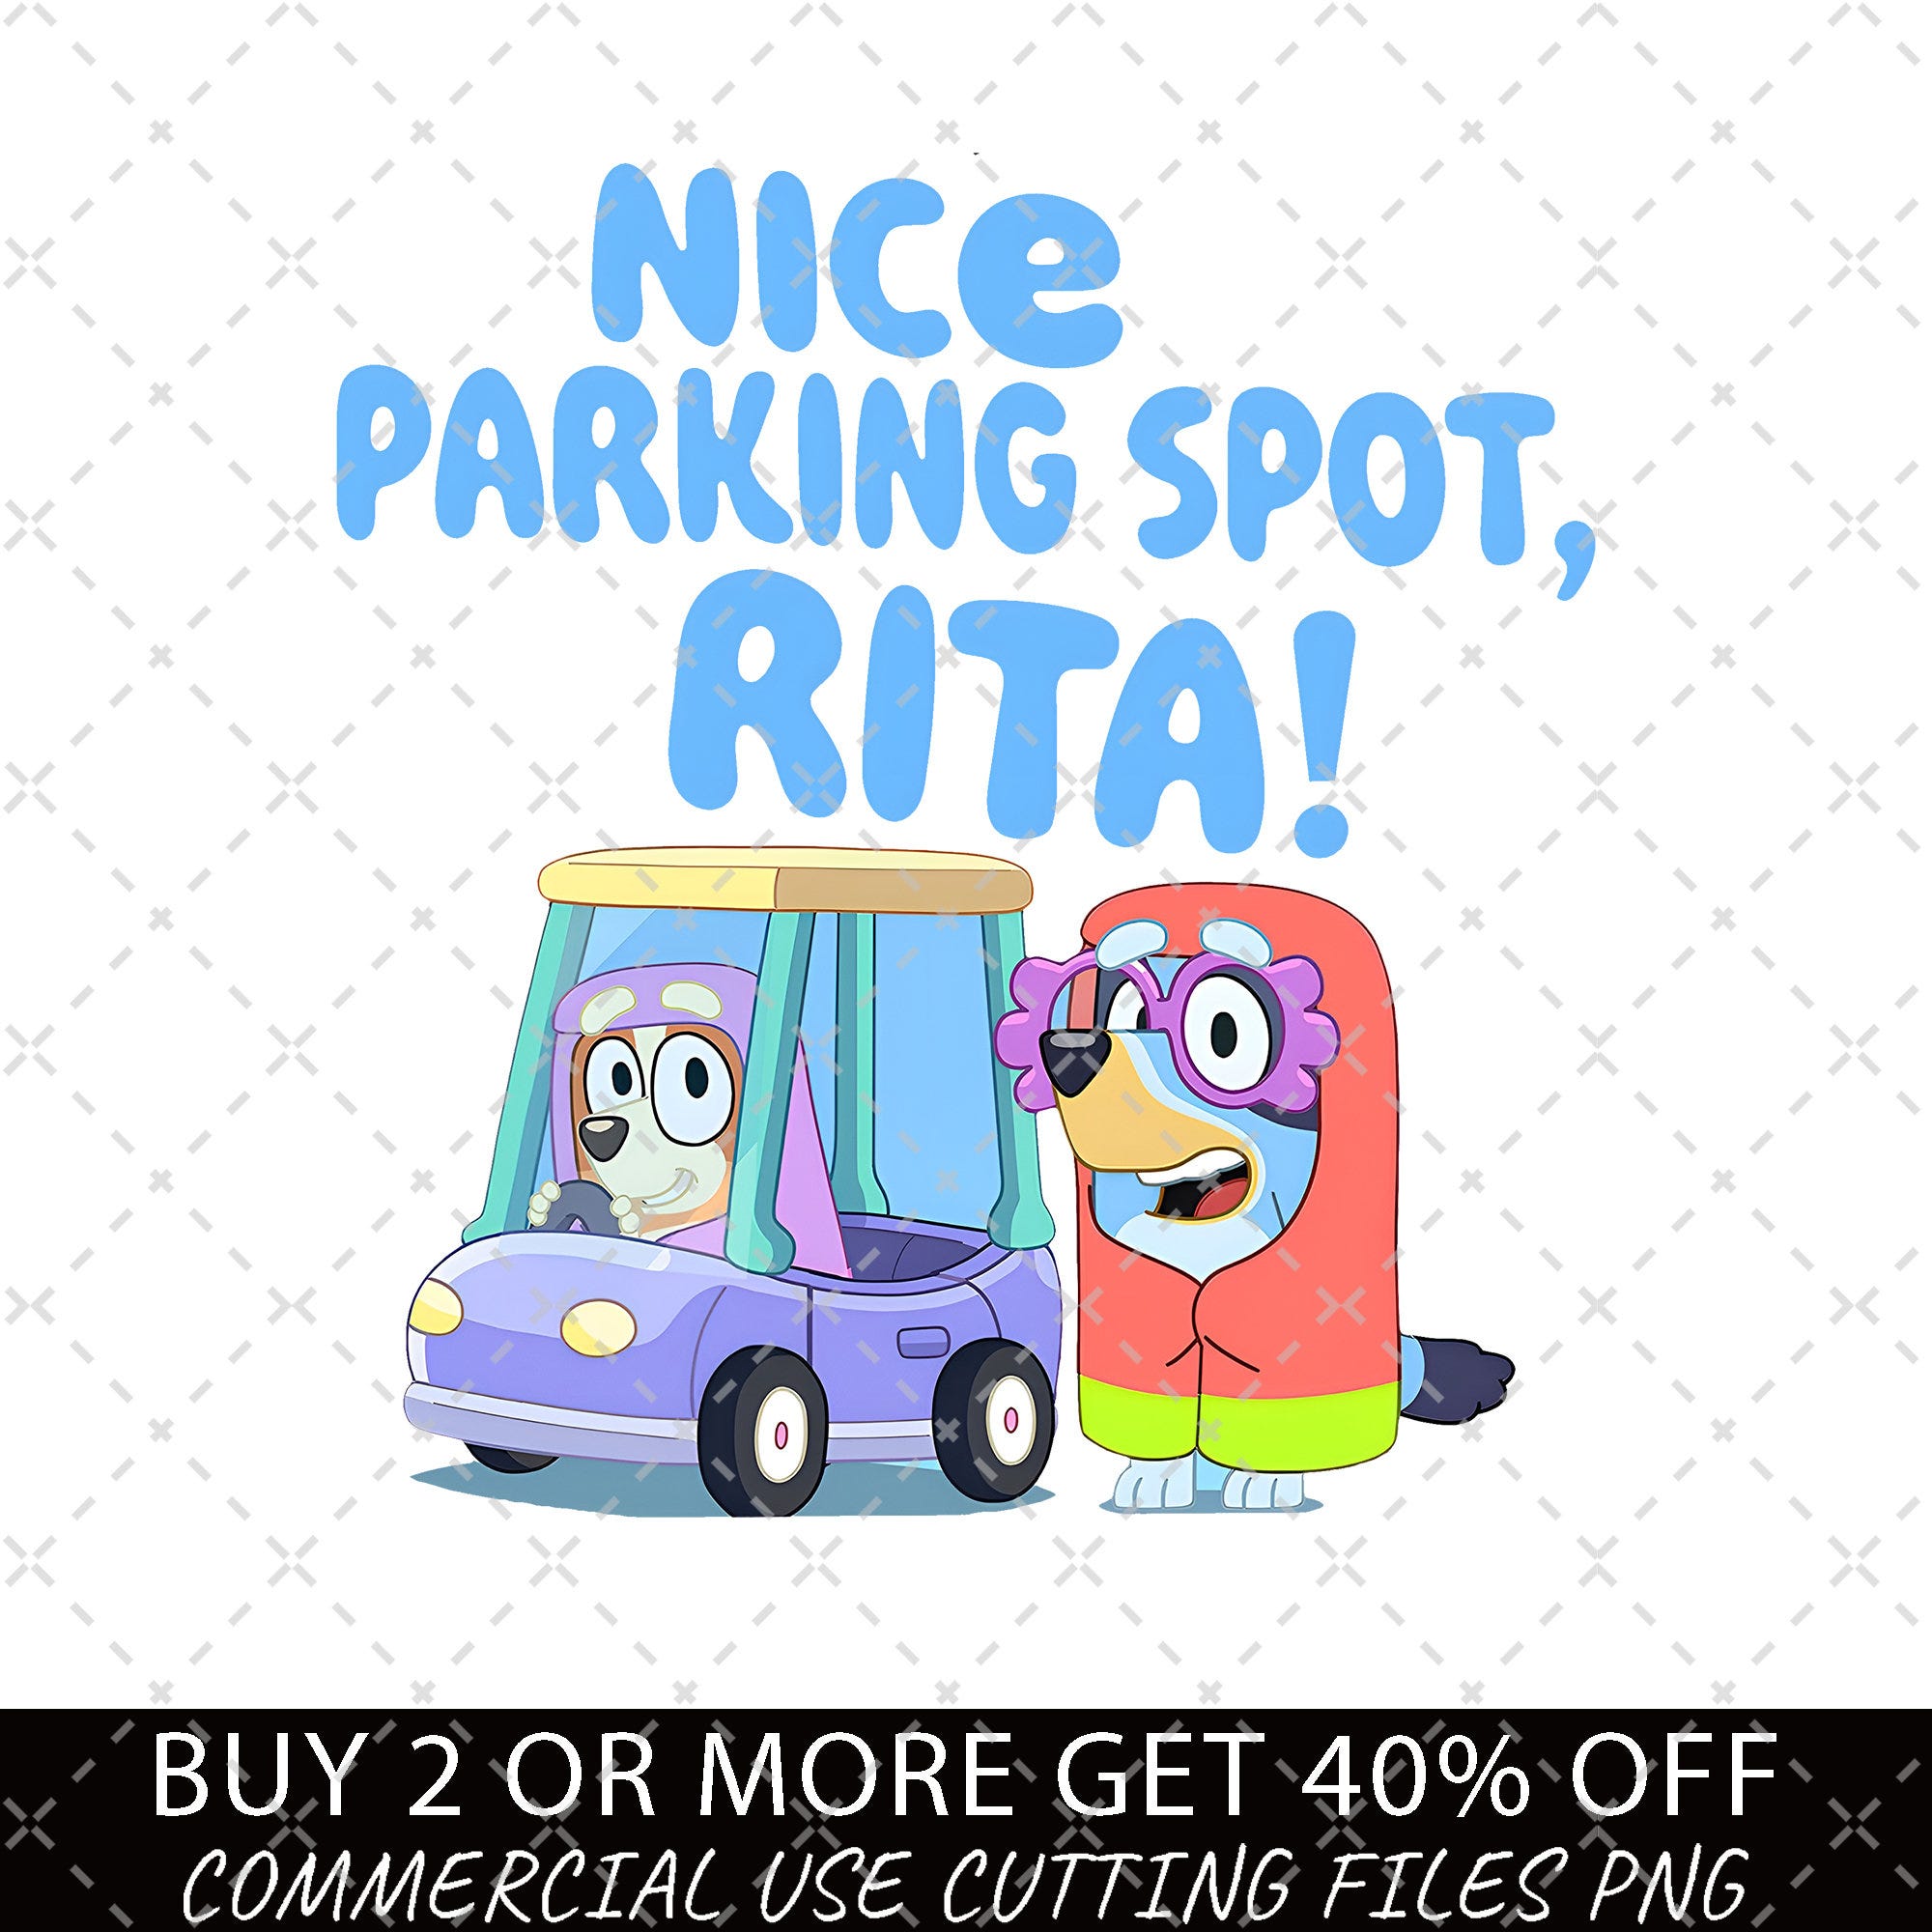 Bluey Png, Nice Parking Spot Rita Stickers PNG, Bluey Family Png, Decal Files, Vinyl Stickers, Car Image